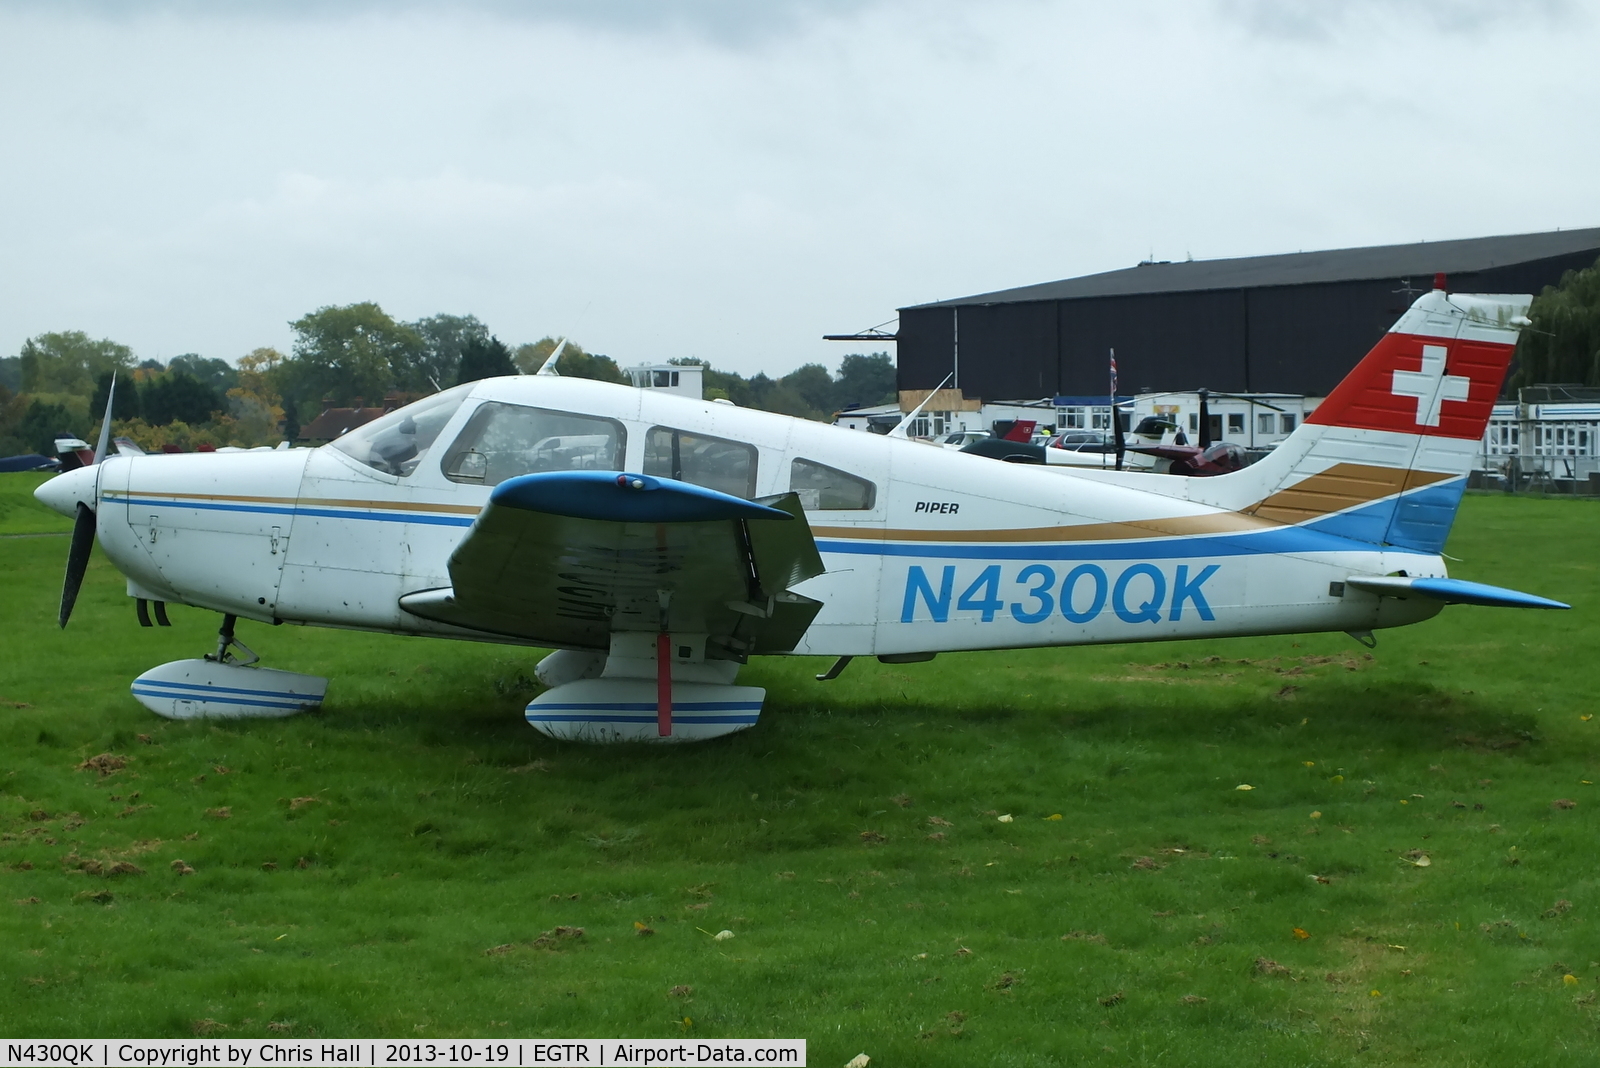 N430QK, 1978 Piper PA-28-161 Warrior II C/N 28-7816495, parked with the other wrecks & relics at Elstree